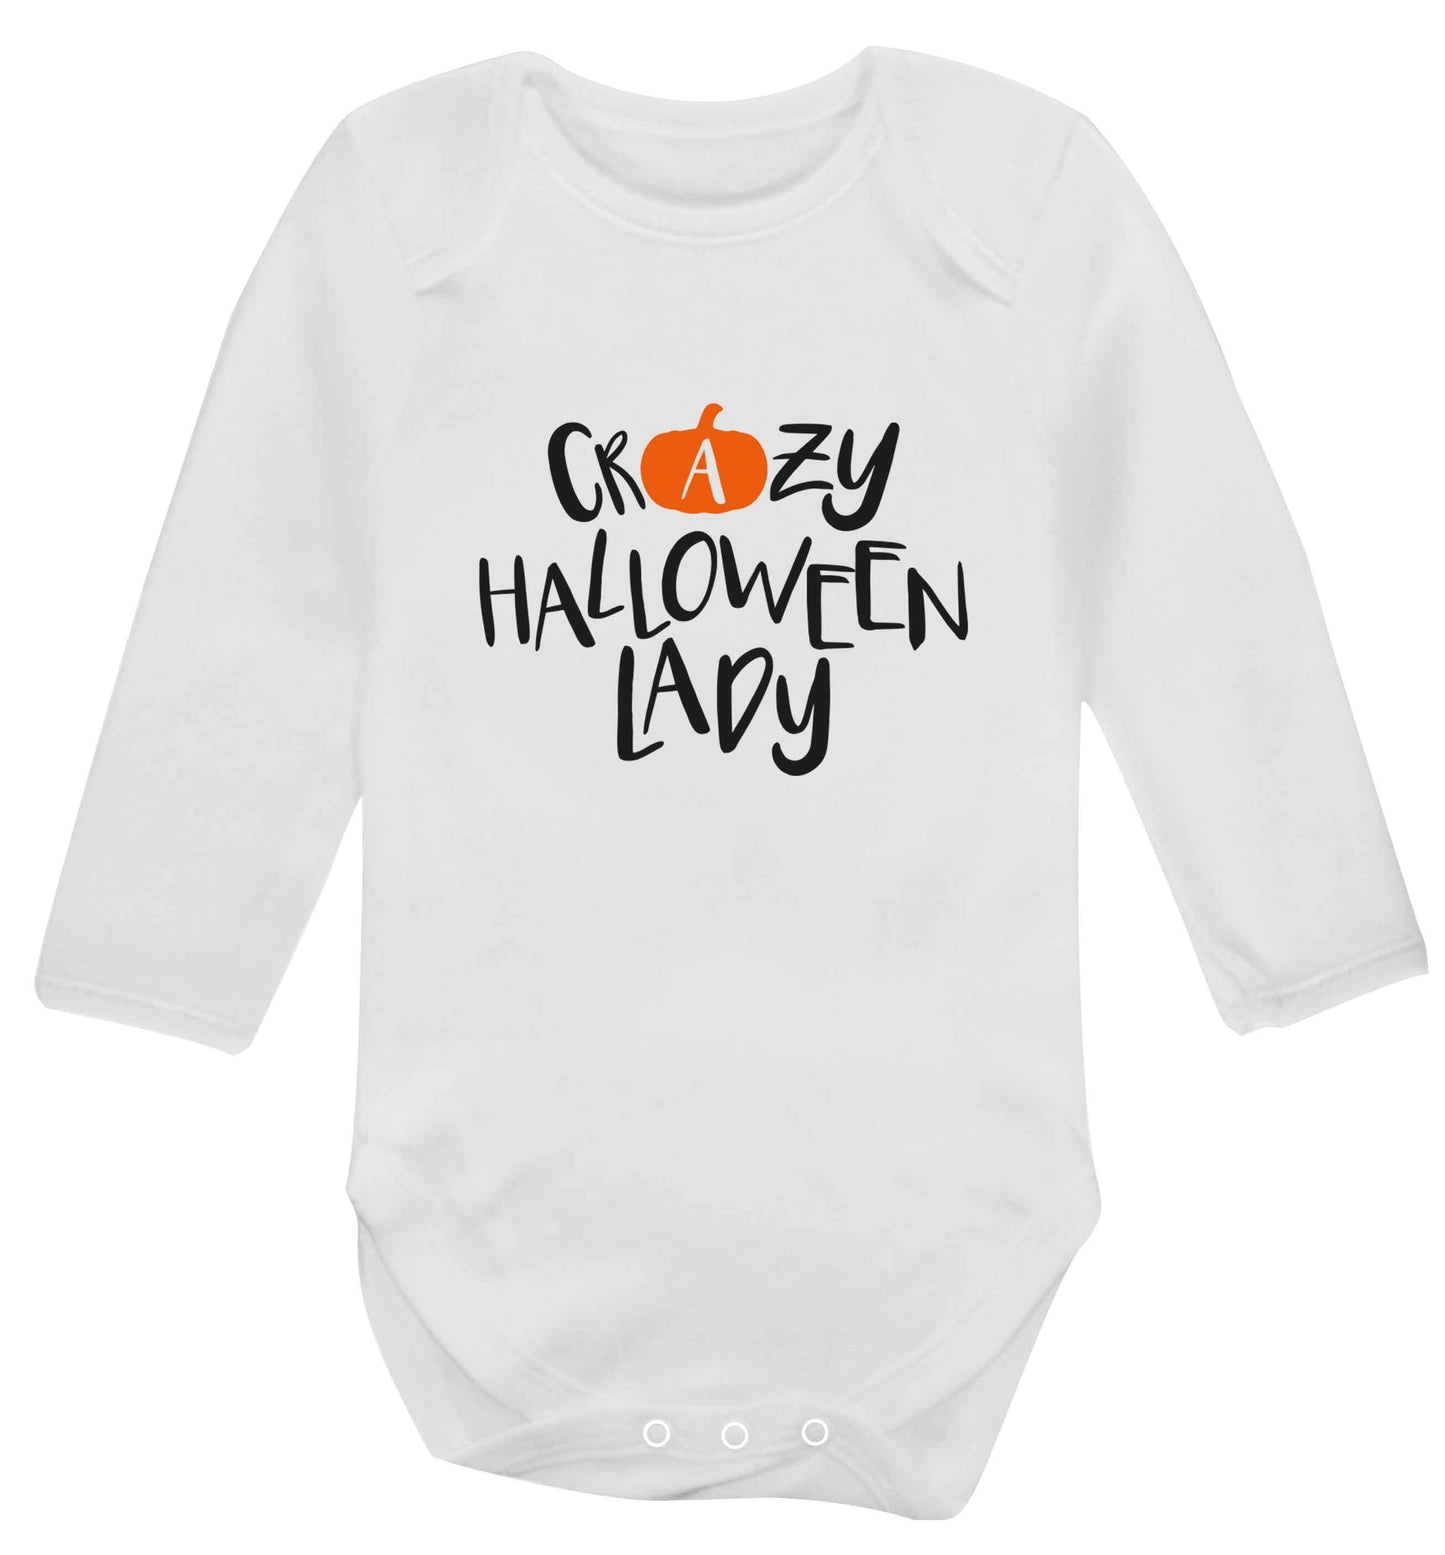 Crazy halloween lady baby vest long sleeved white 6-12 months